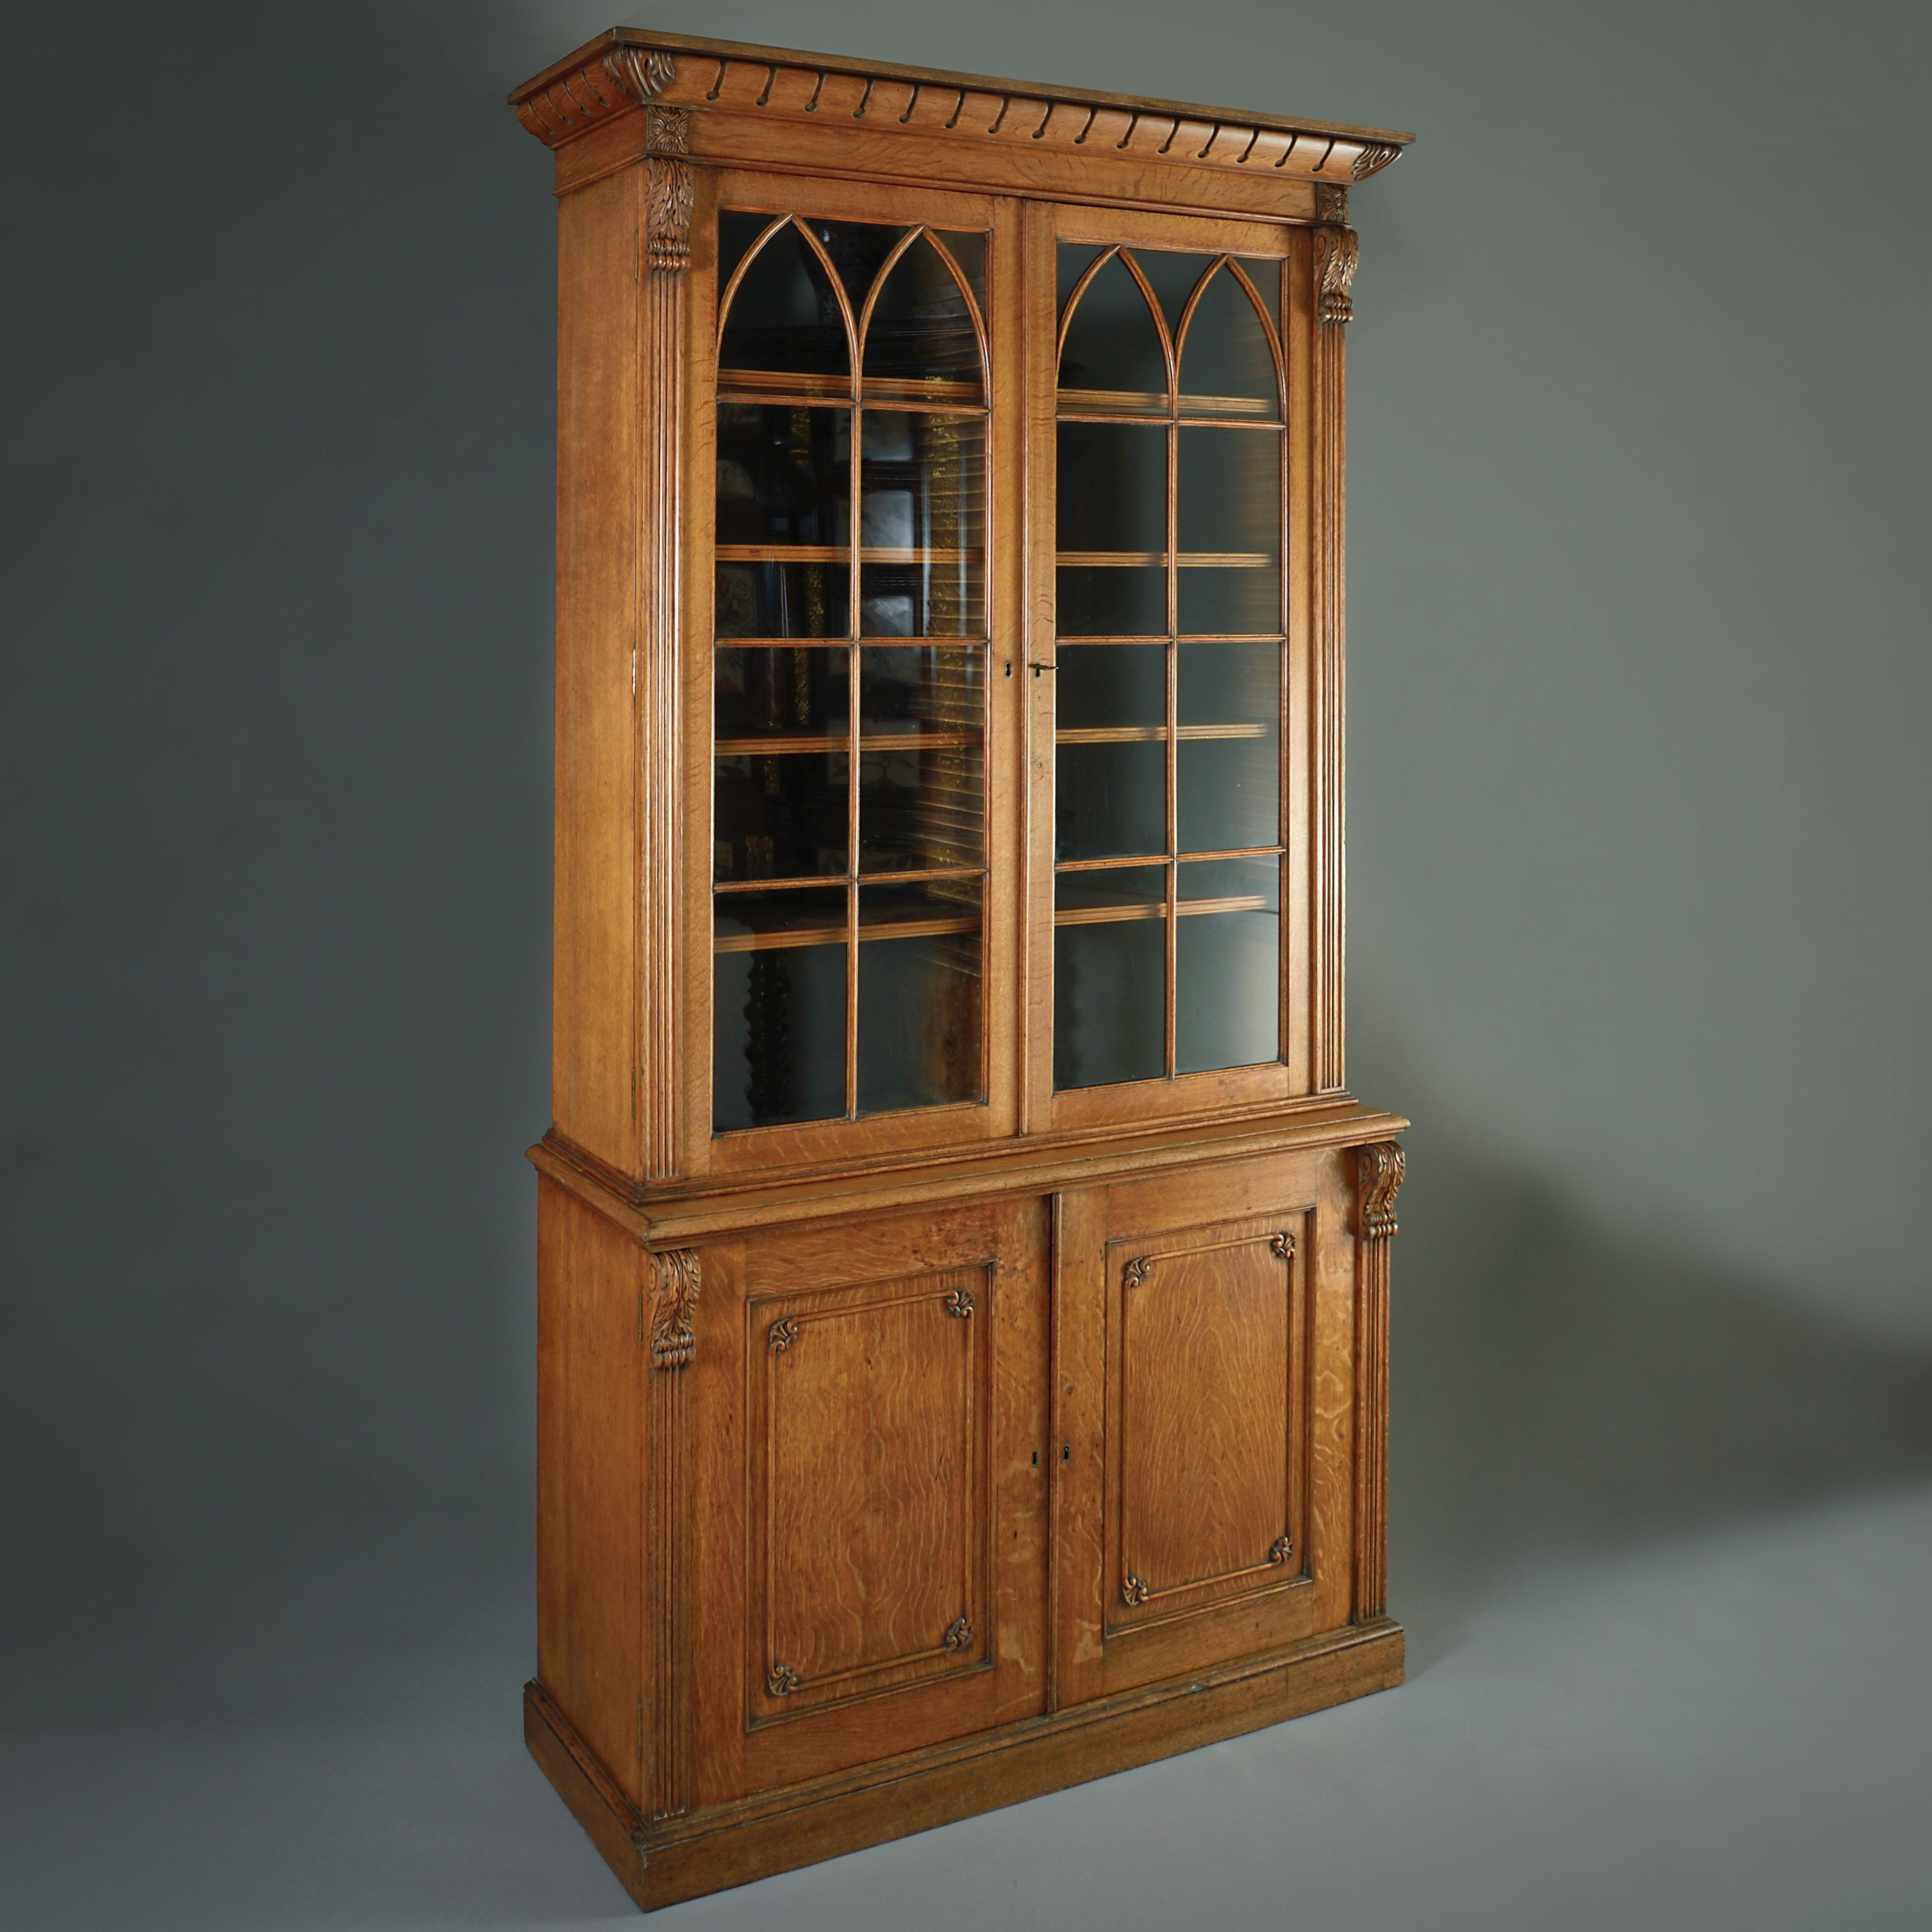 A GEORGE IV GOTHIC GOLDEN OAK BOOKCASE, CIRCA 1830.

With two glazed doors enclosing adjustable shelves above two panelled doors enclosing further adjustable shelves.